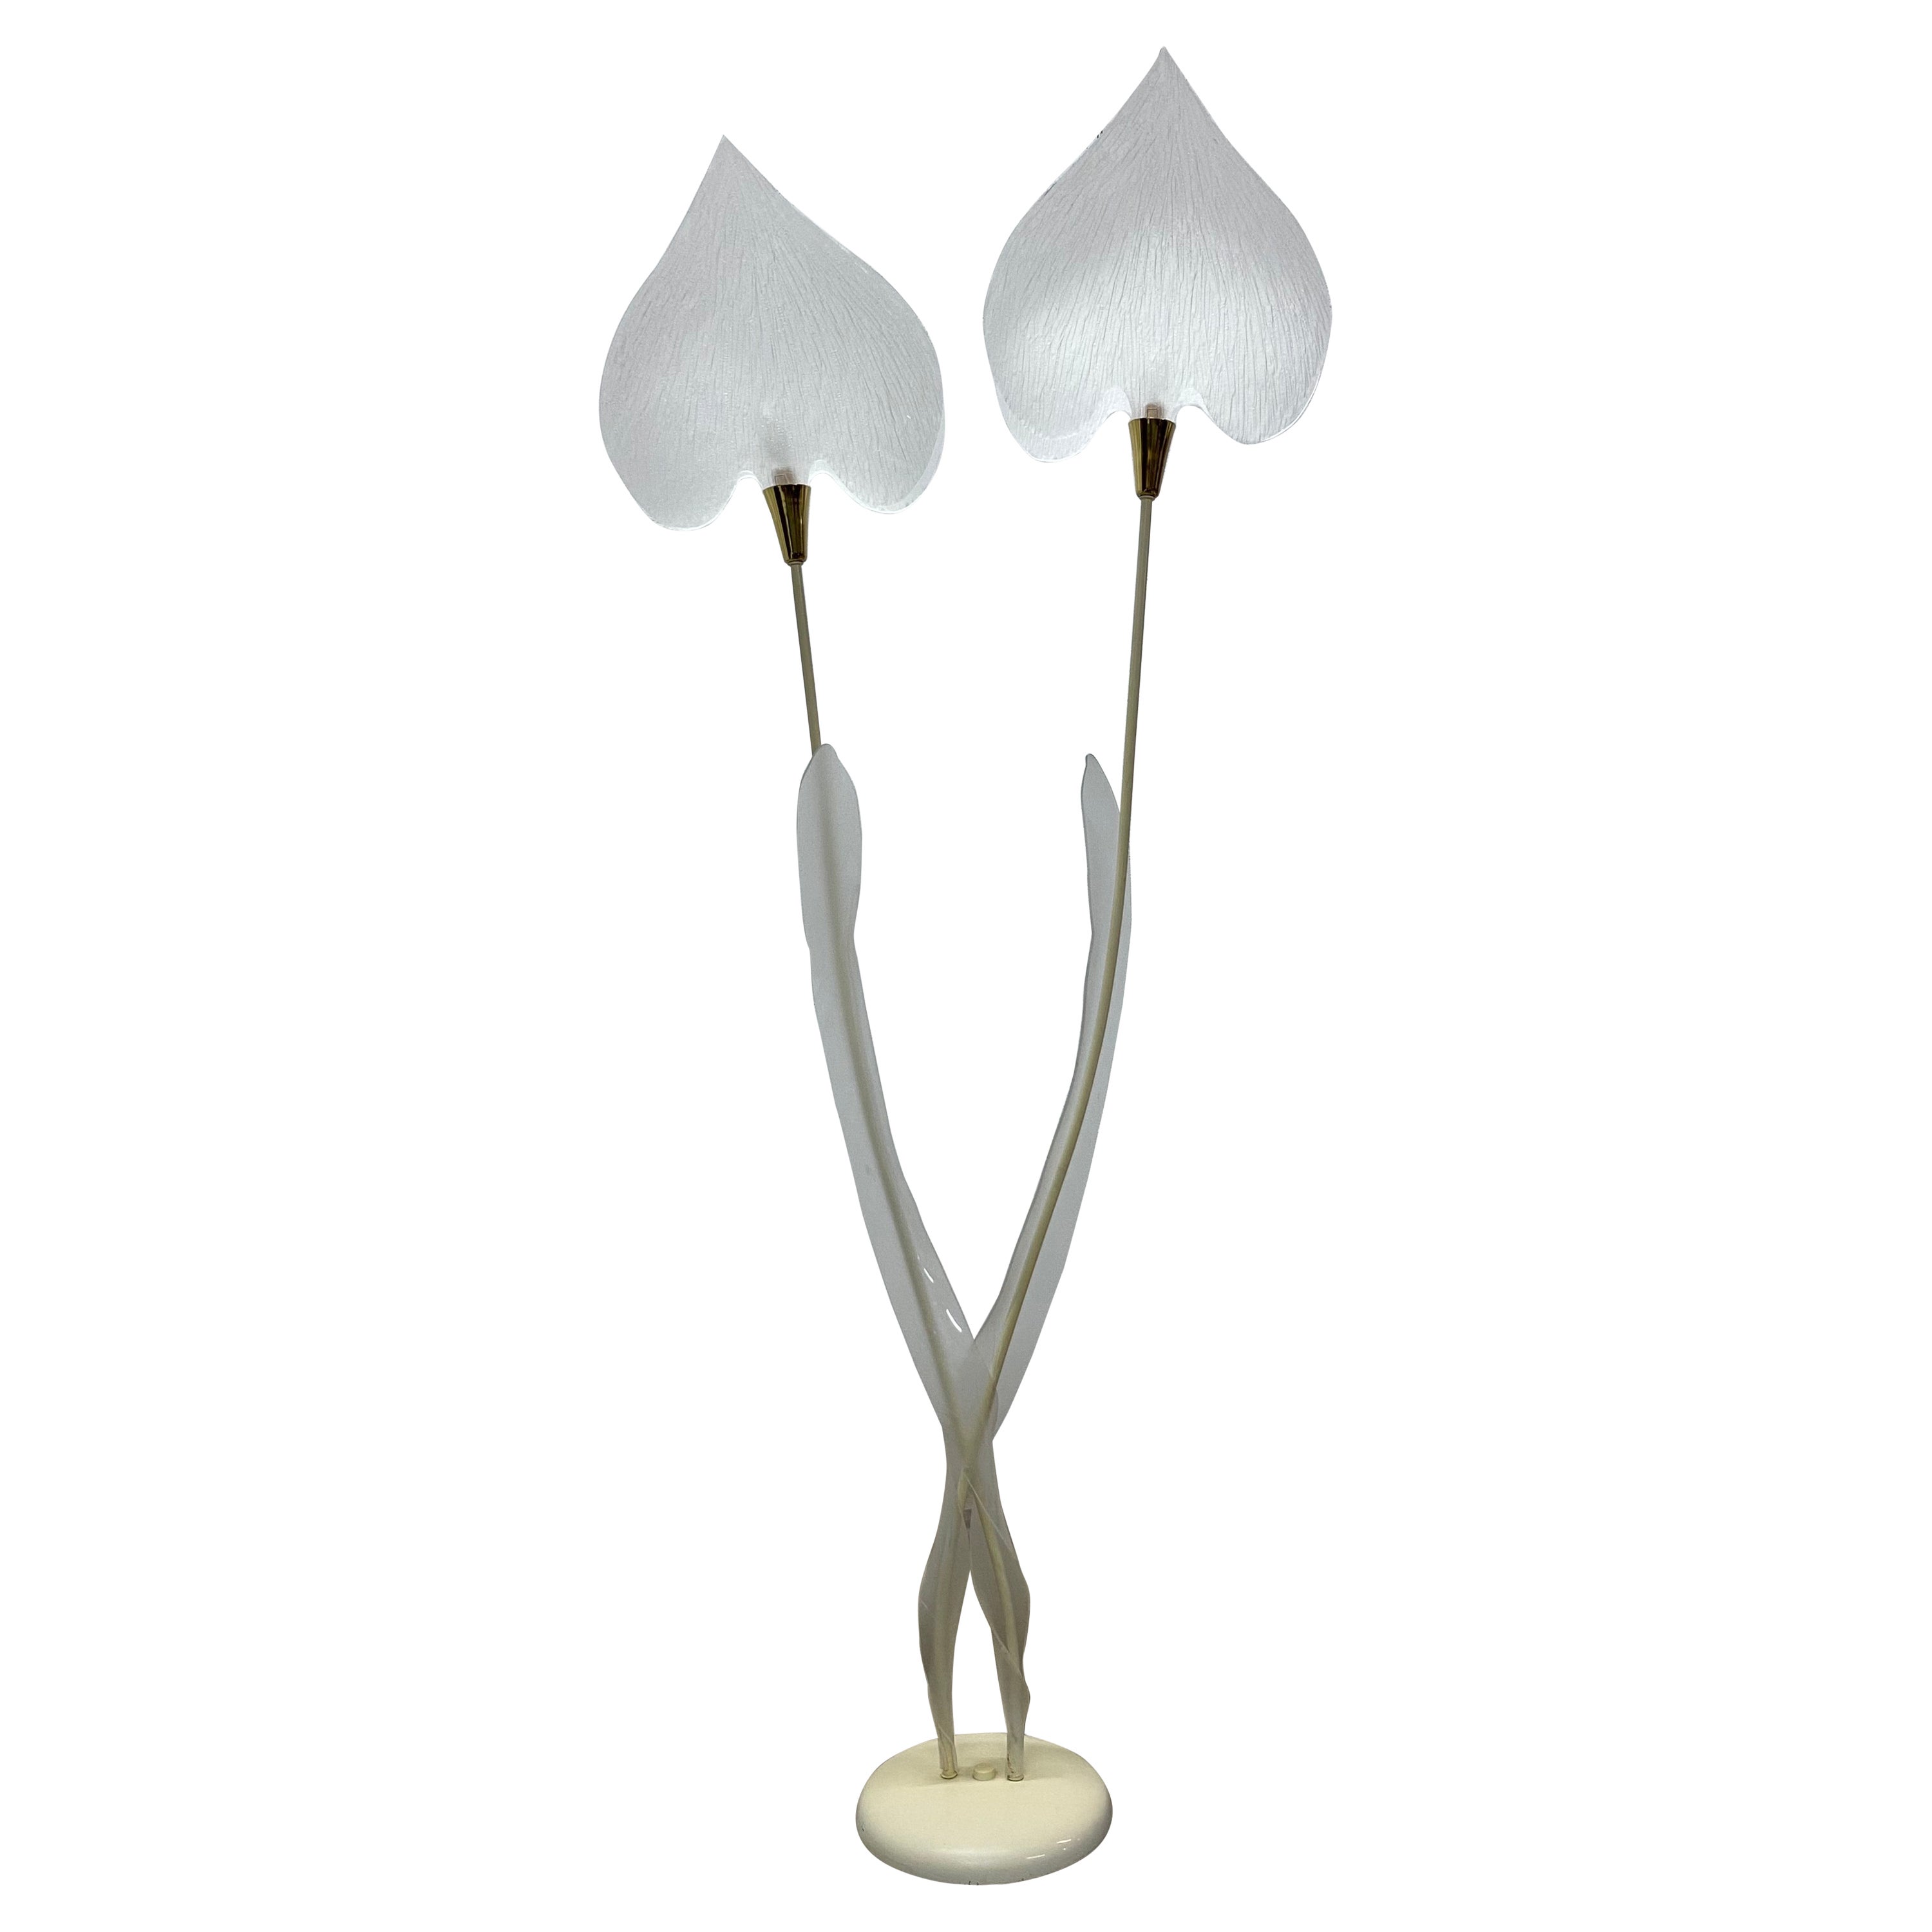 Sculptural Lucite Leaf and Brass Accent Floor Lamp from the 1970s For Sale